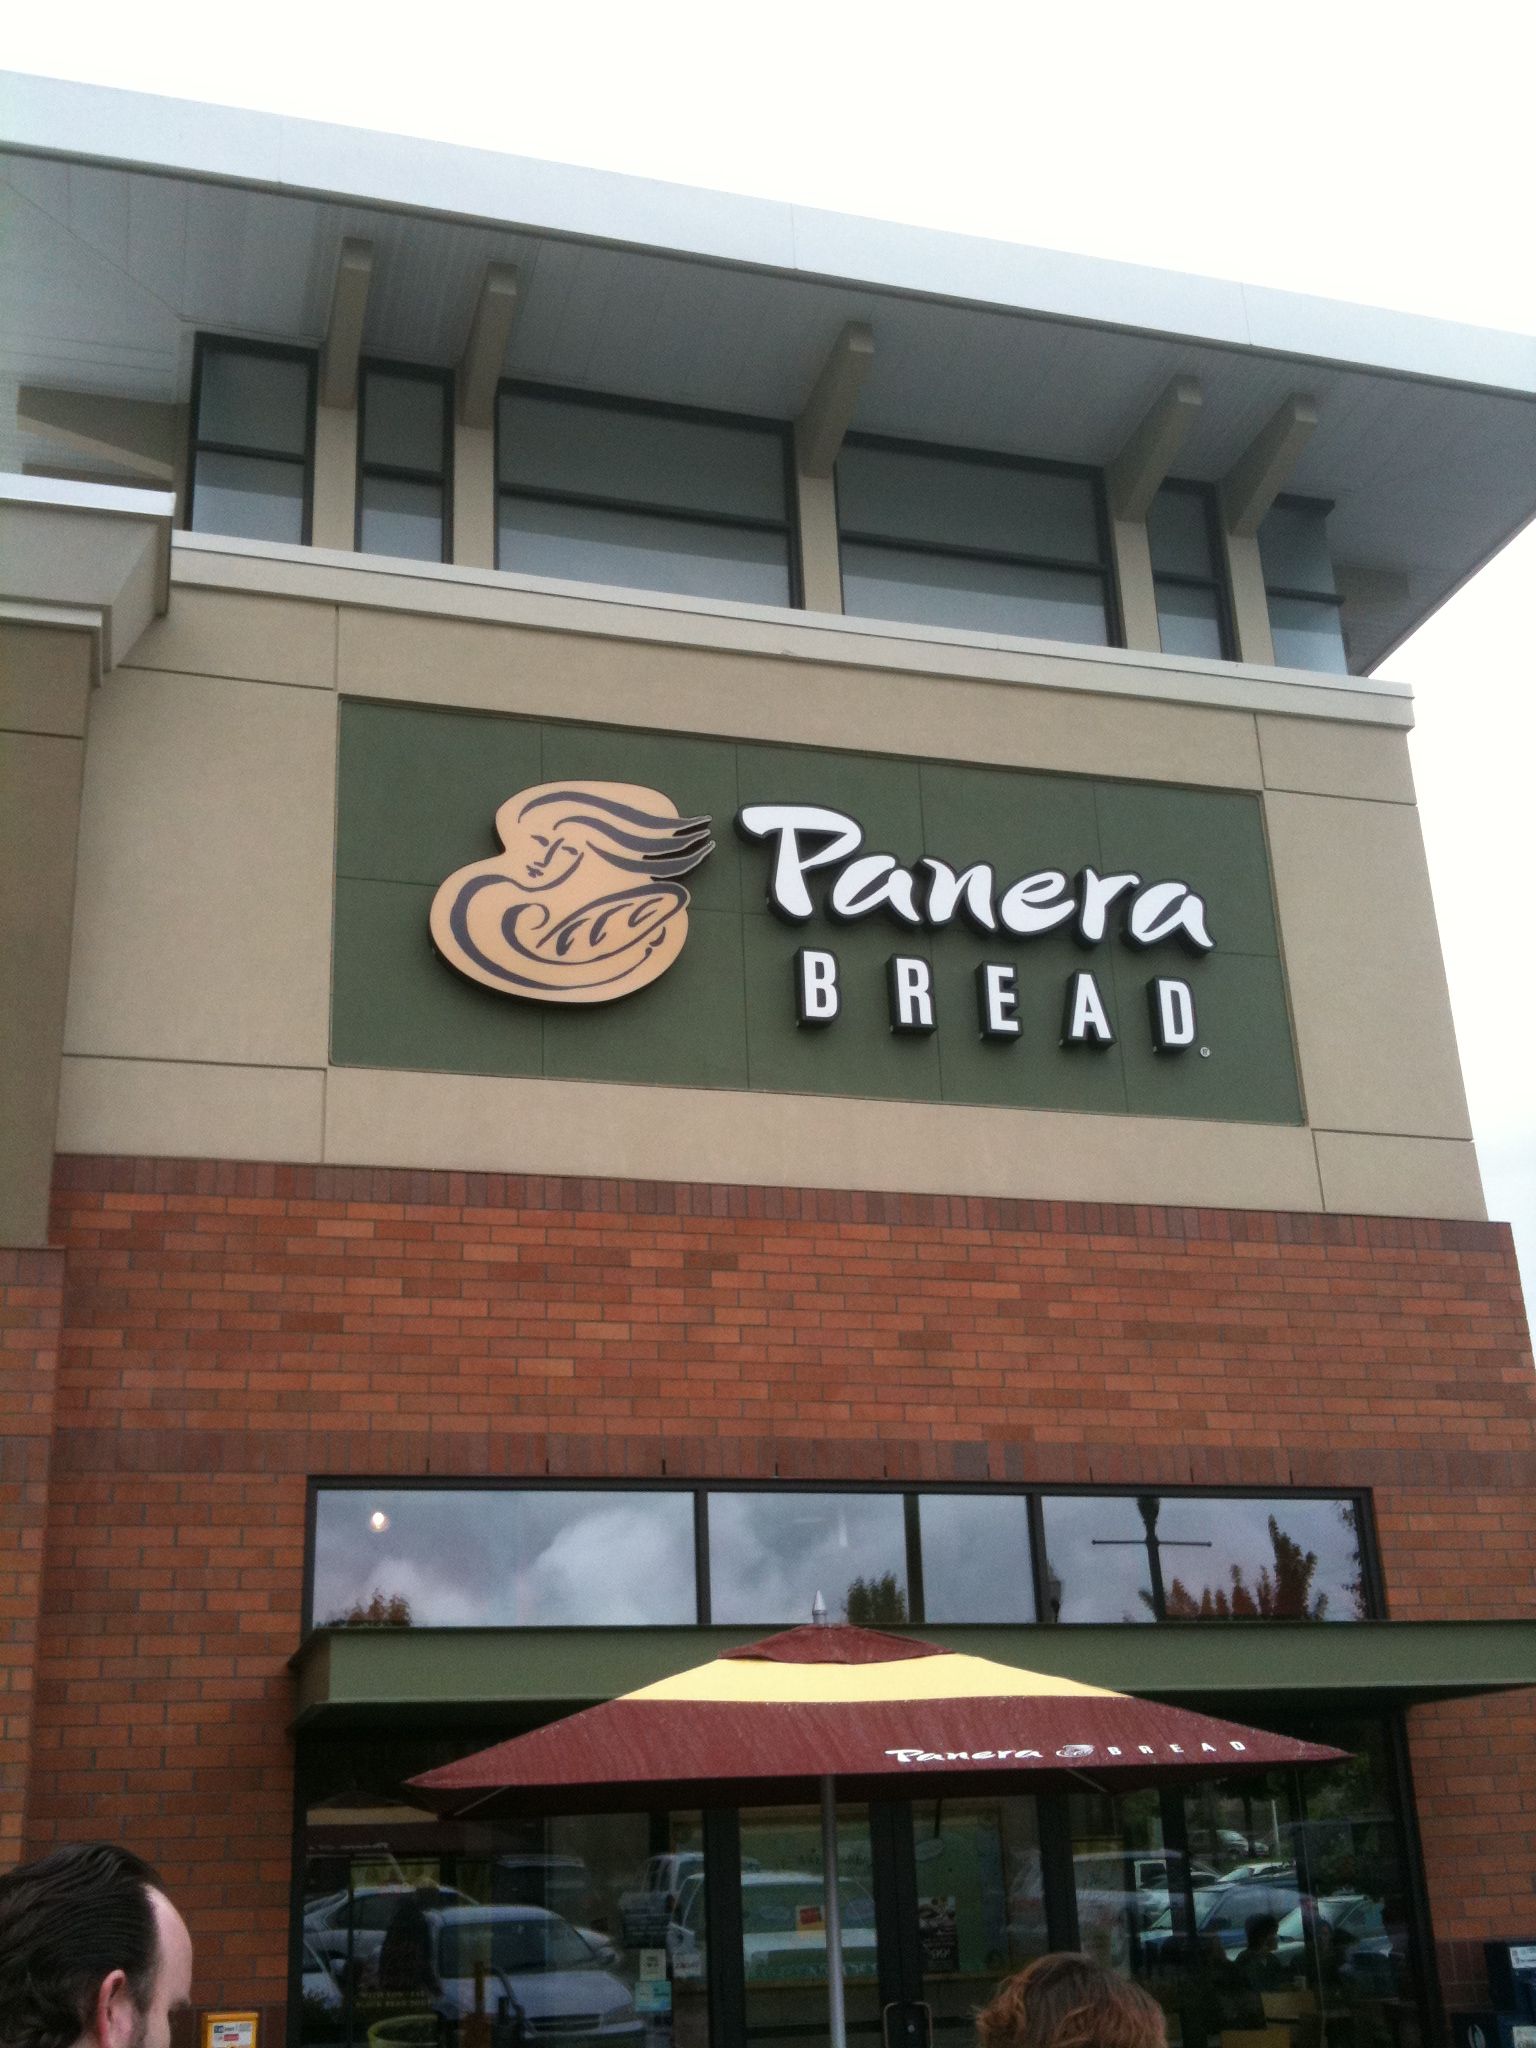 Panera Bread overtime pay lawsuit